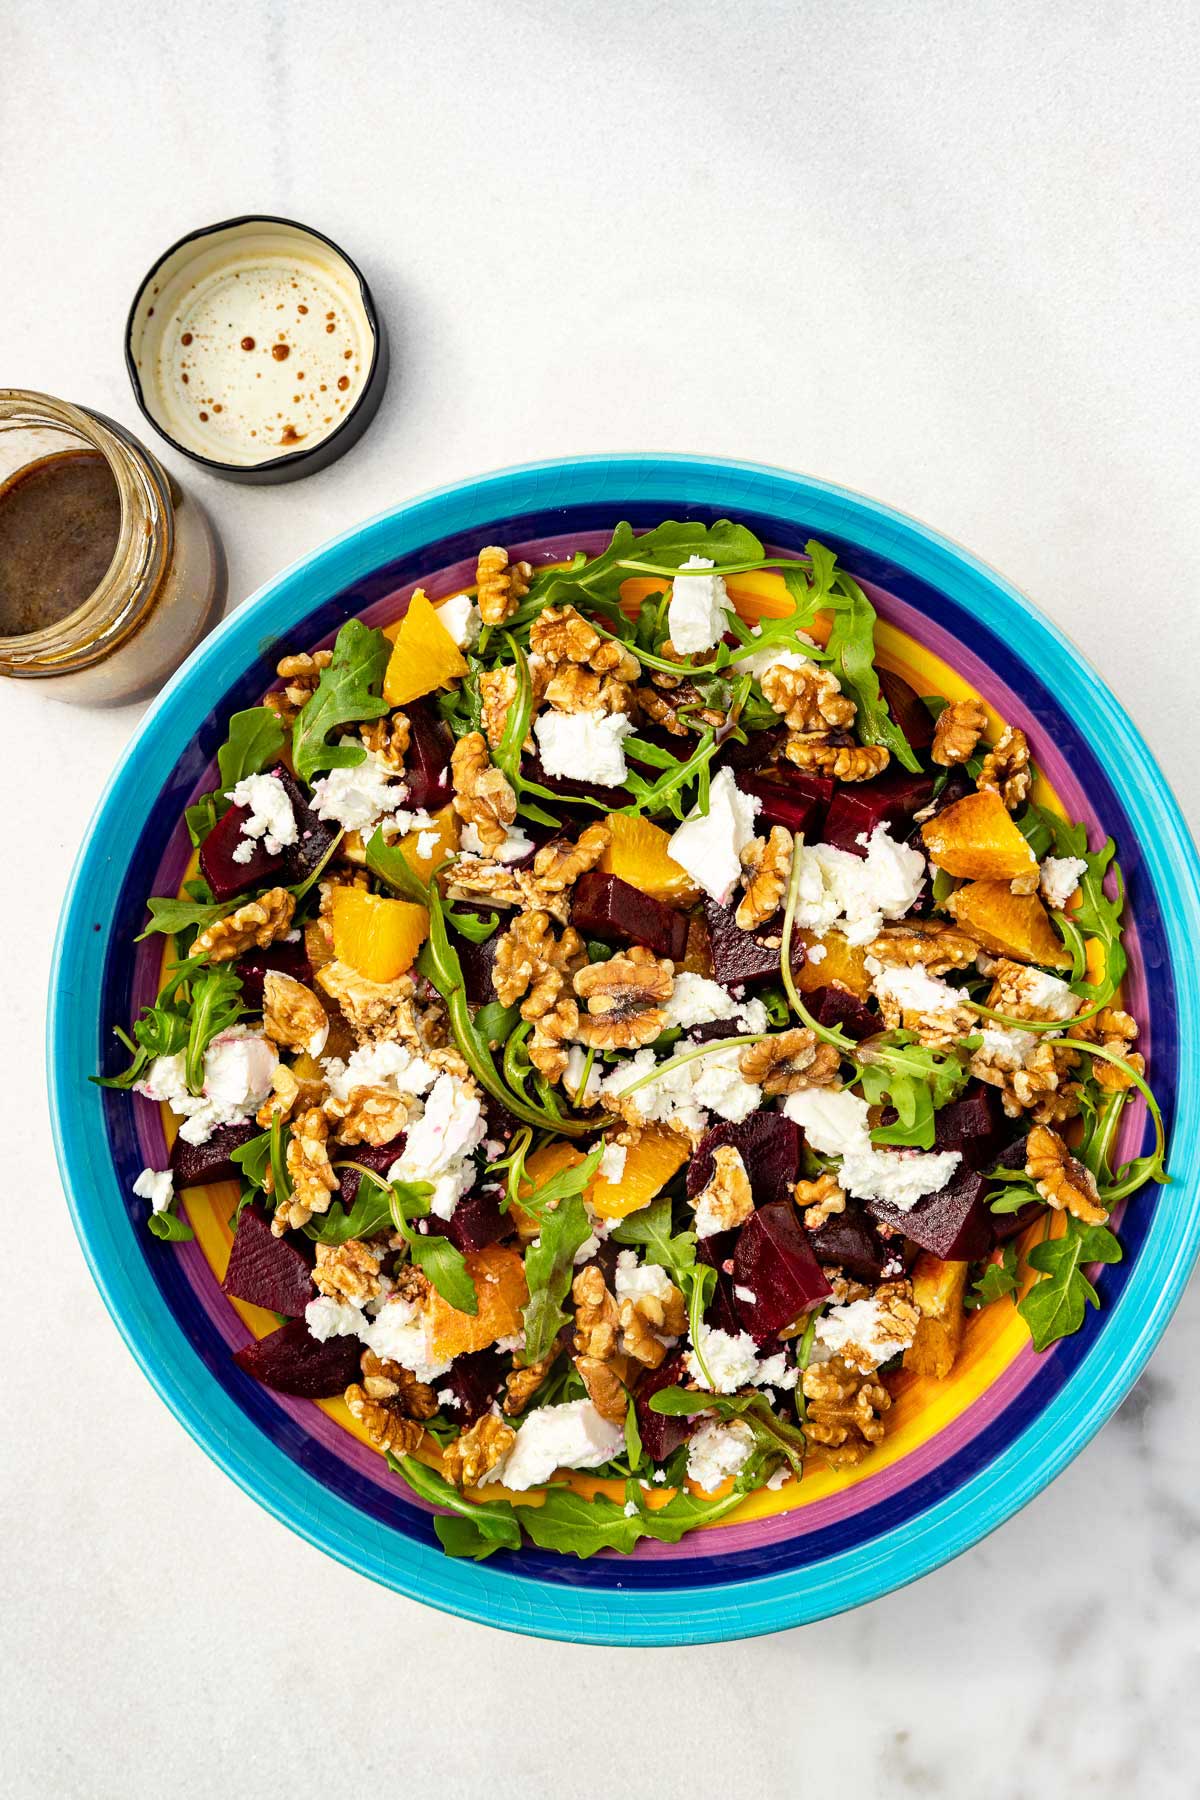 A beetroot and feta salad with walnuts and orange in a colorful salad bowl on a marble background with an opened jar of dressing top left.